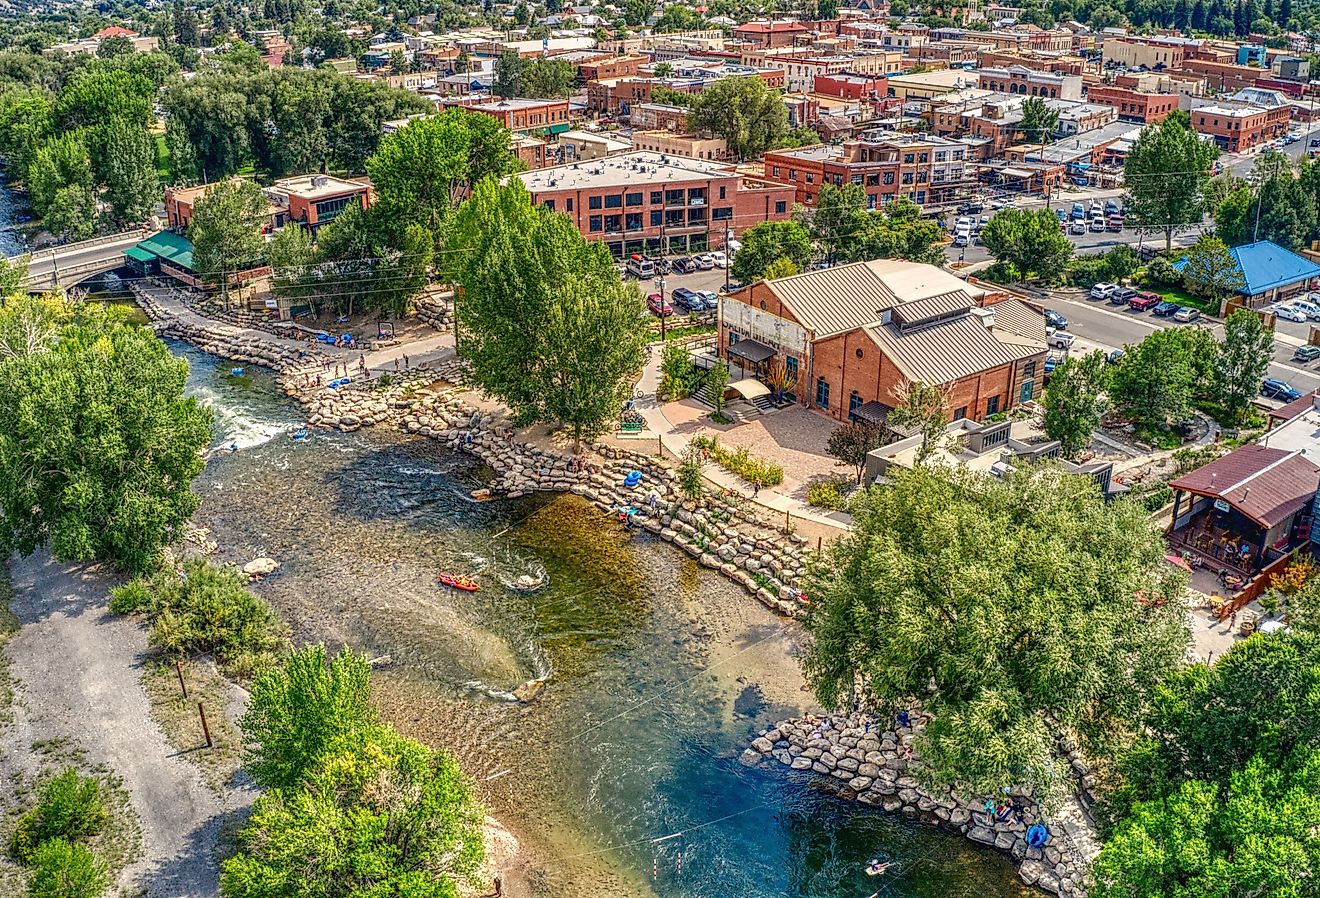 Salida, Colorado is a Tourist Town on the Arkansas river popular for white water rafting.